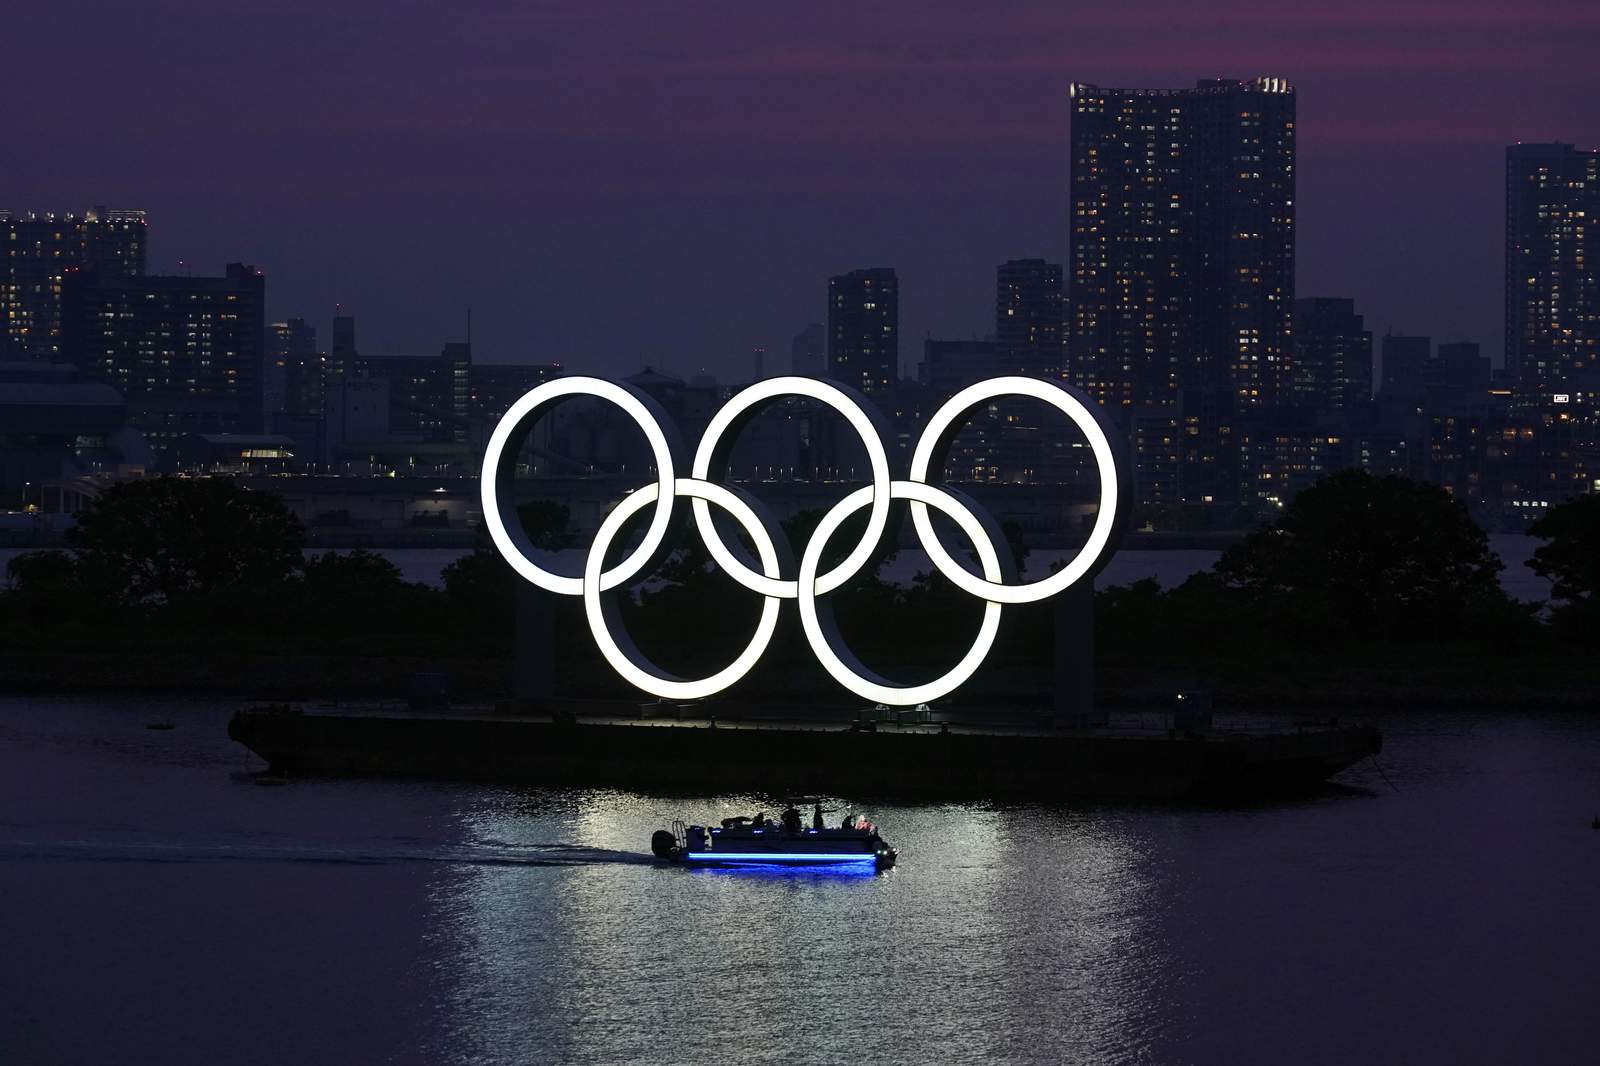 Postponed Tokyo Olympics could be downsized and simplified